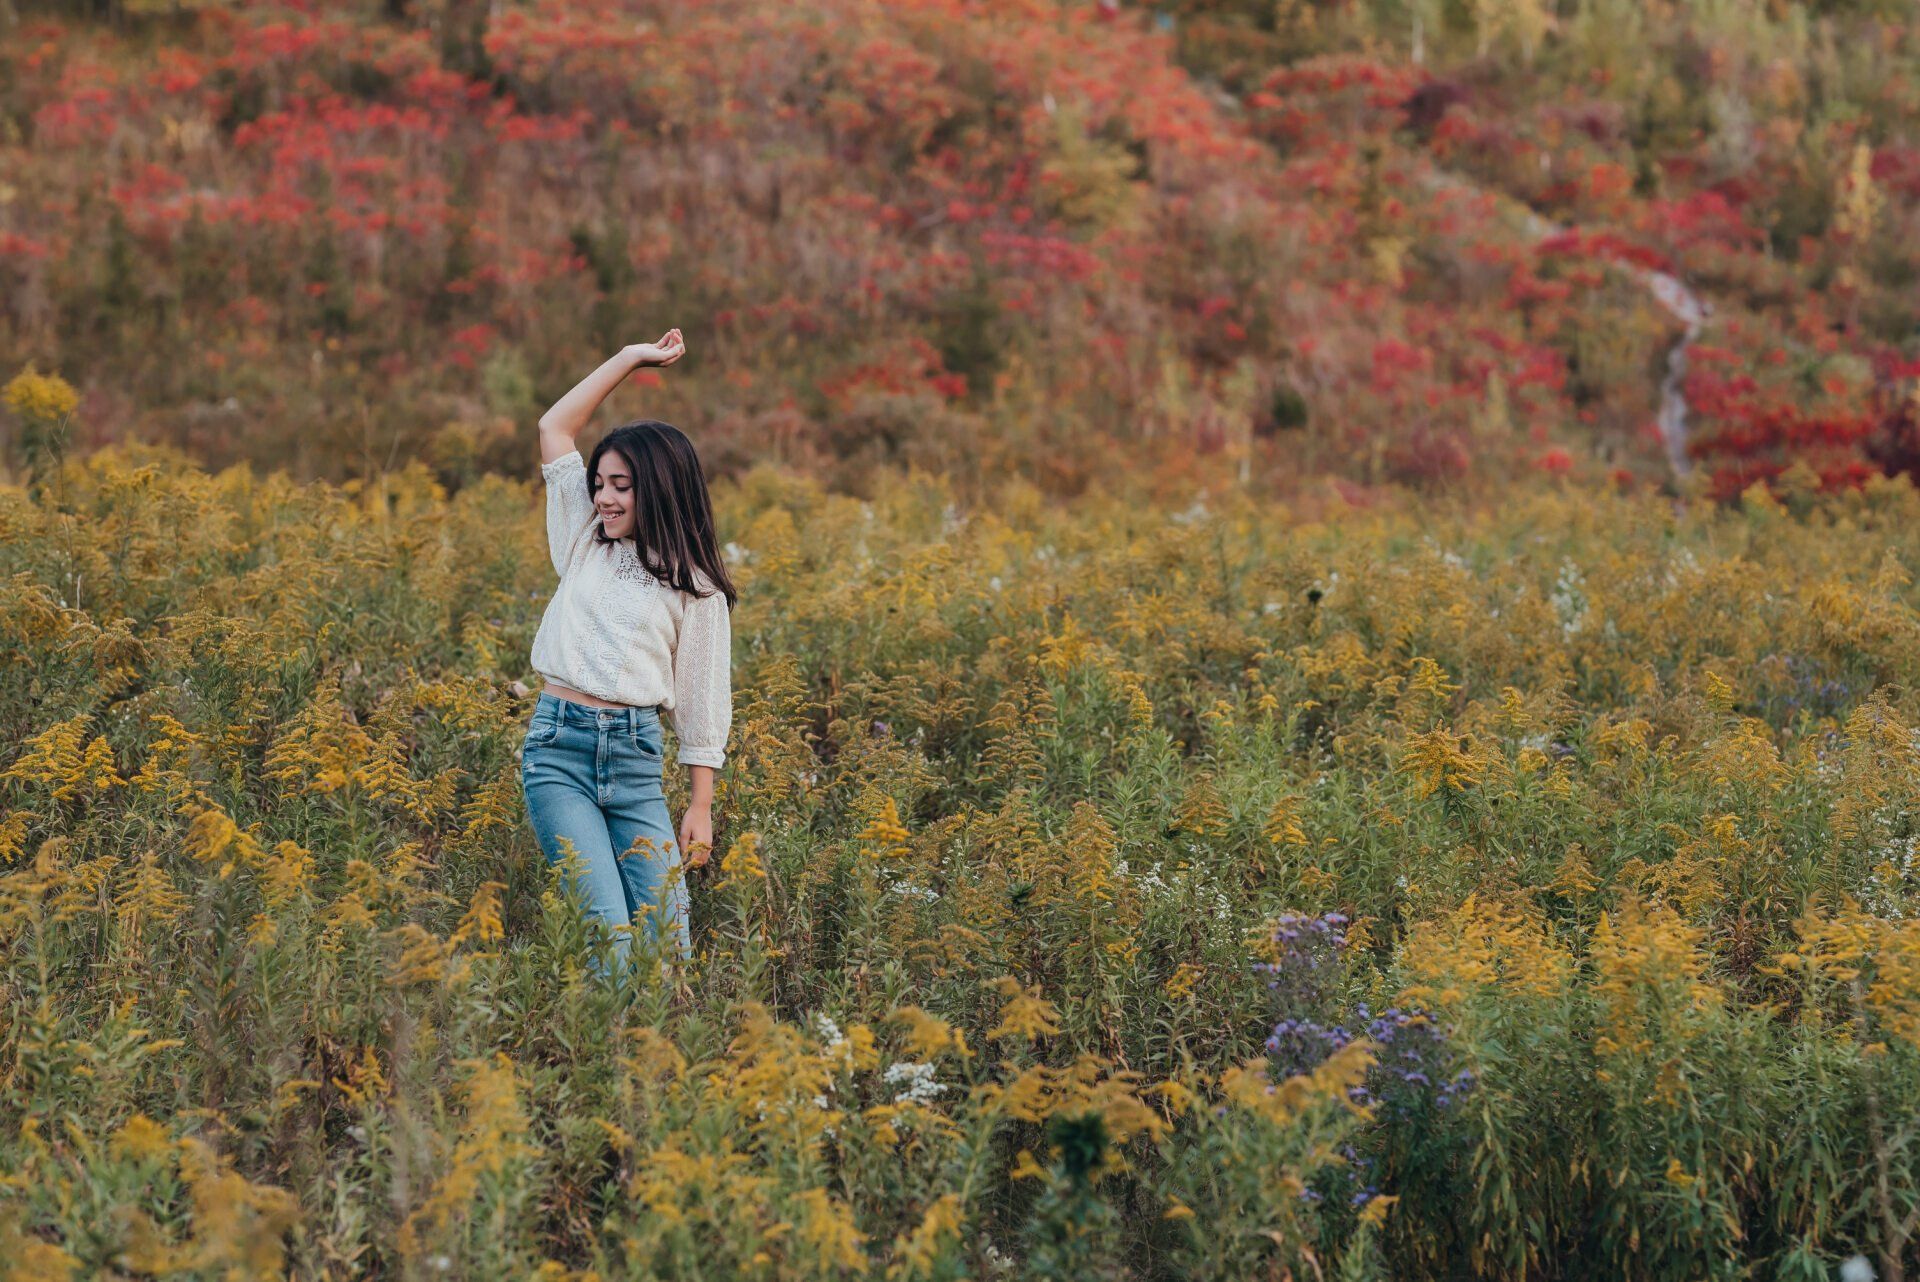 Young girl standing in field of yellow wildflowers for fall photoshoot